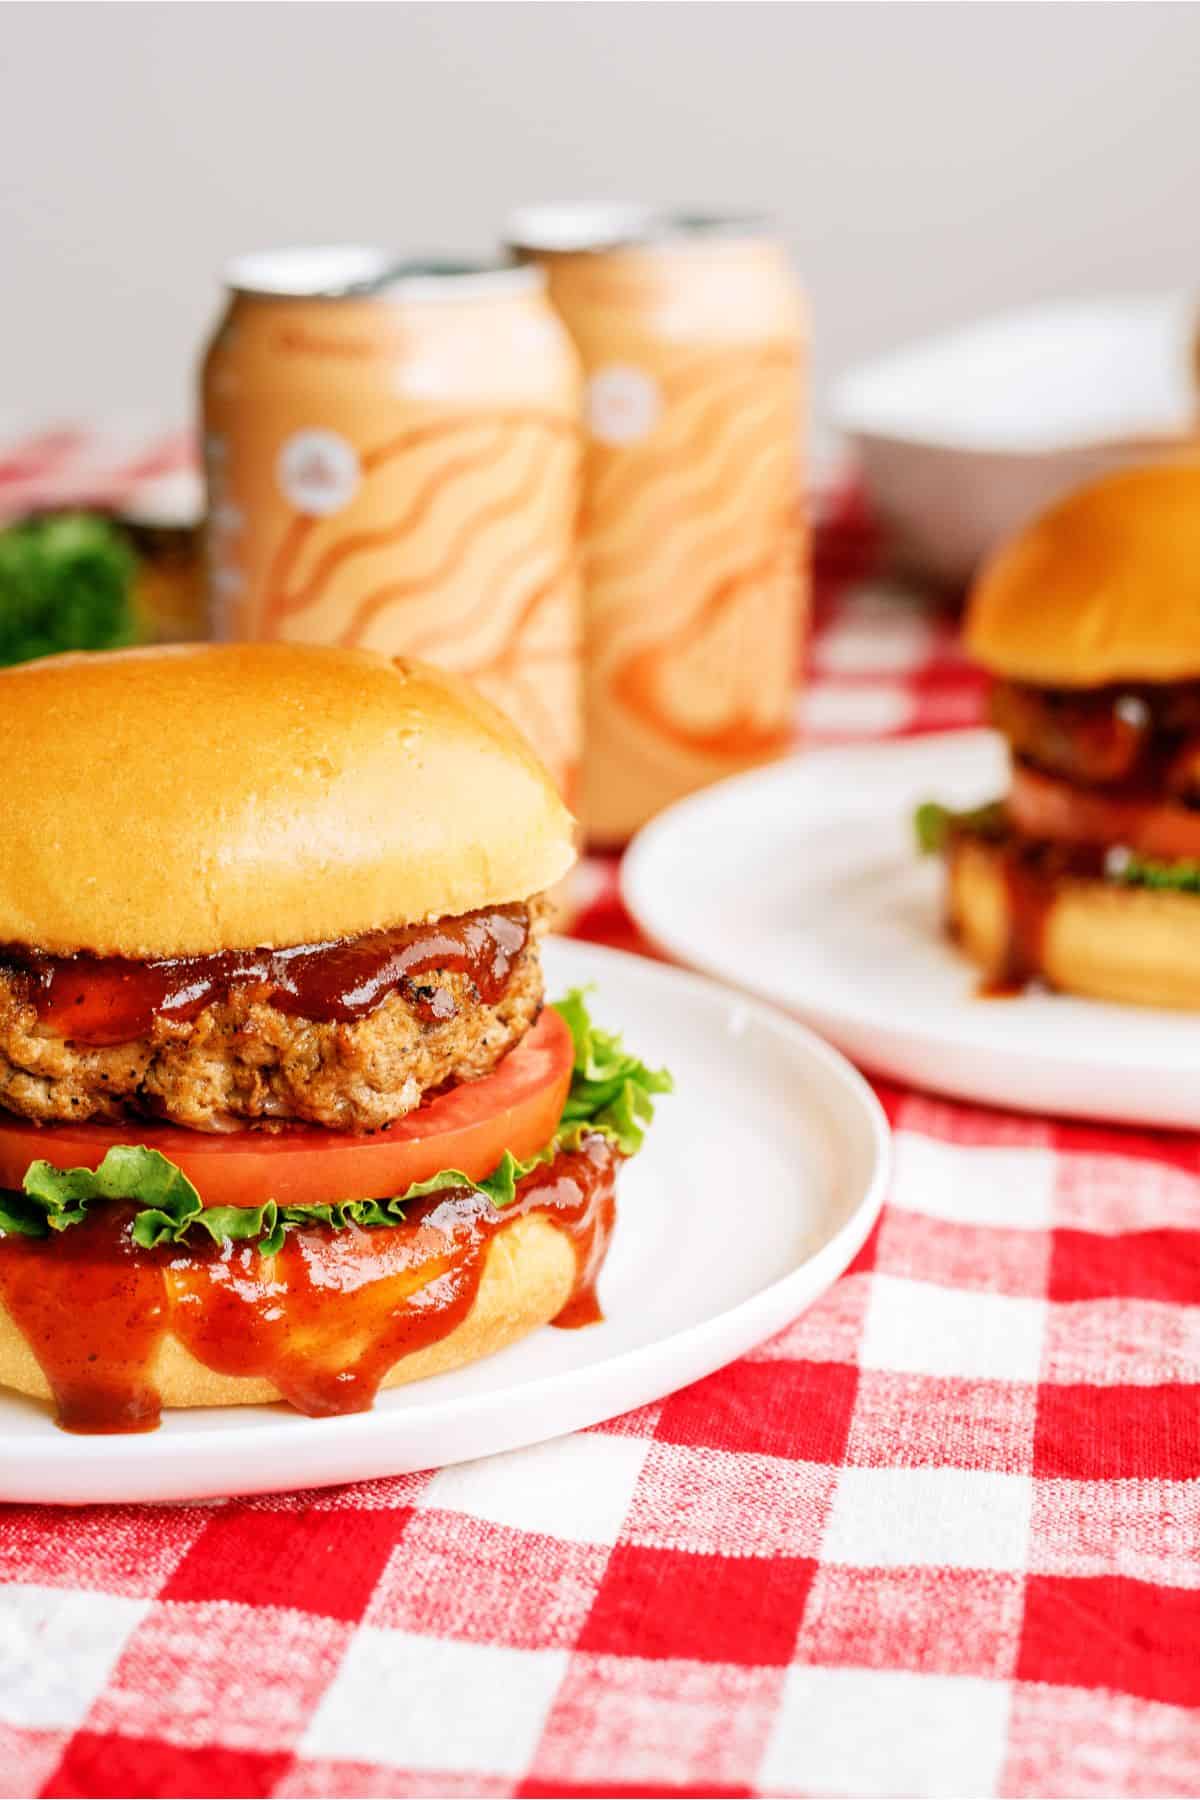 Juicy BBQ Turkey Burgers on plates with soda cans in the background